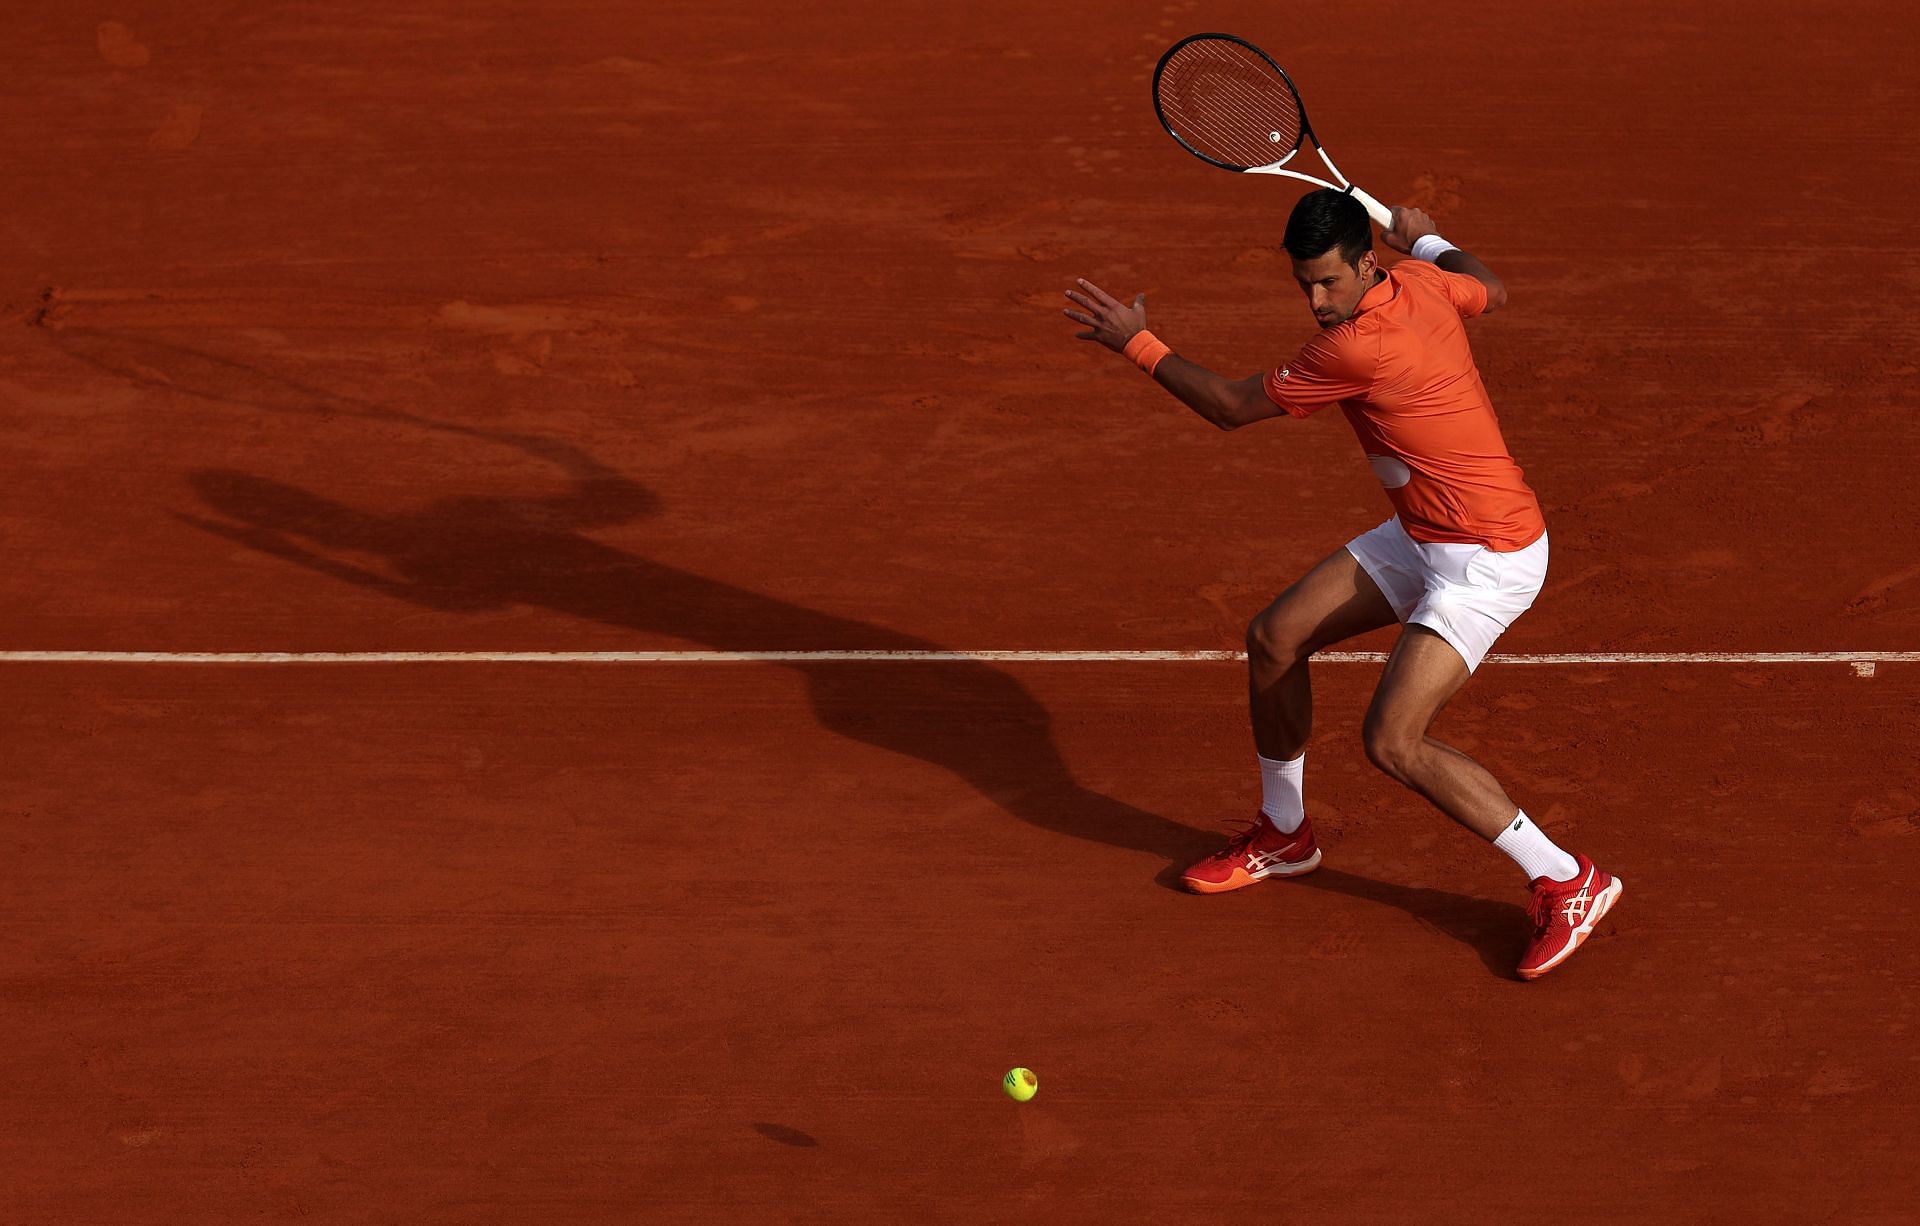 Novak Djokovic continues to go strong despite being on the wrong side of 30.